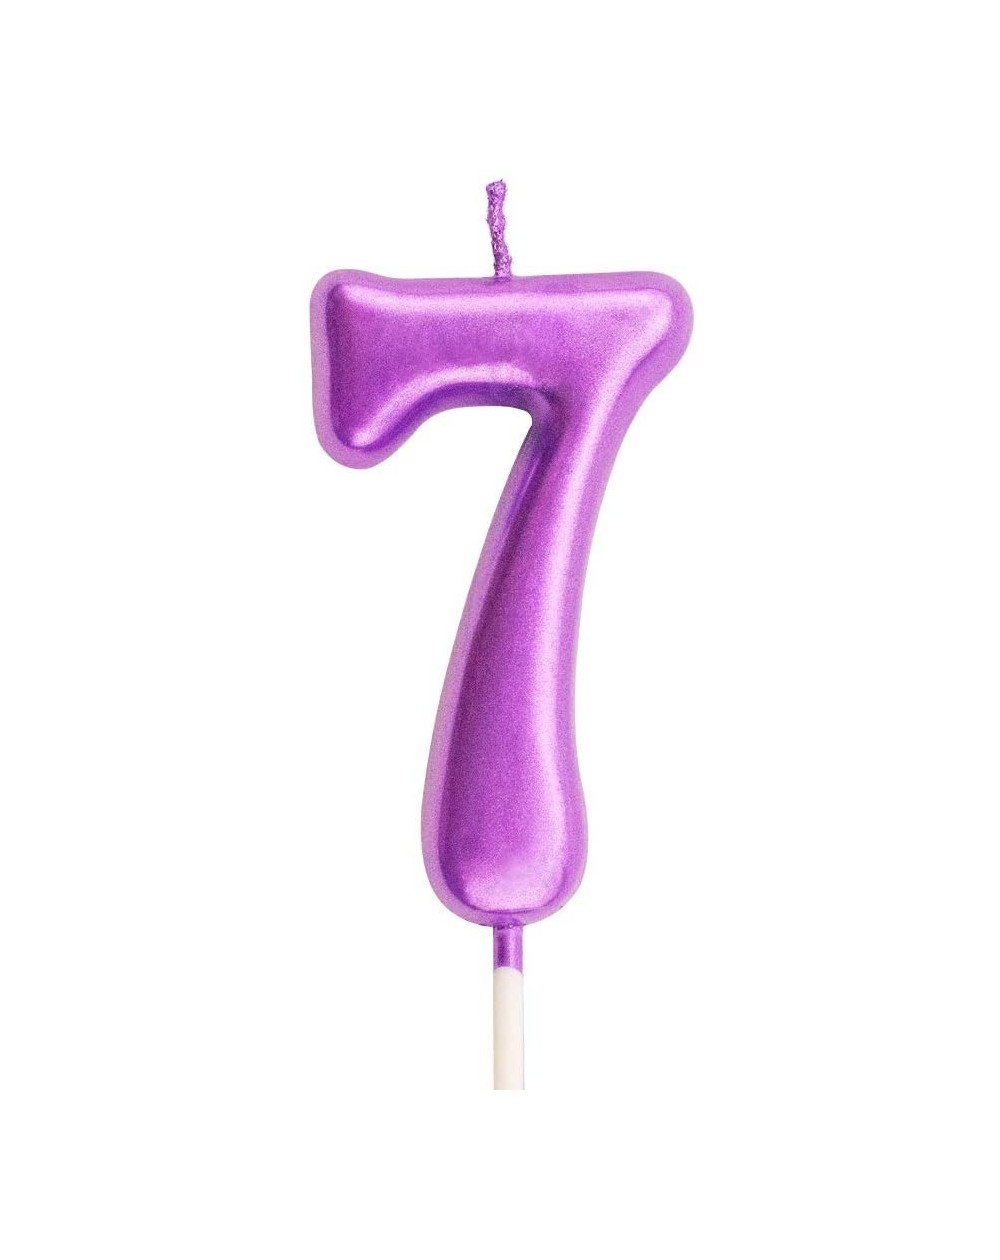 Birthday Candles 7th Birthday Candle Seven Years Purple Happy Birthday Number 7 Candles for Cake Topper Decoration for Party ...